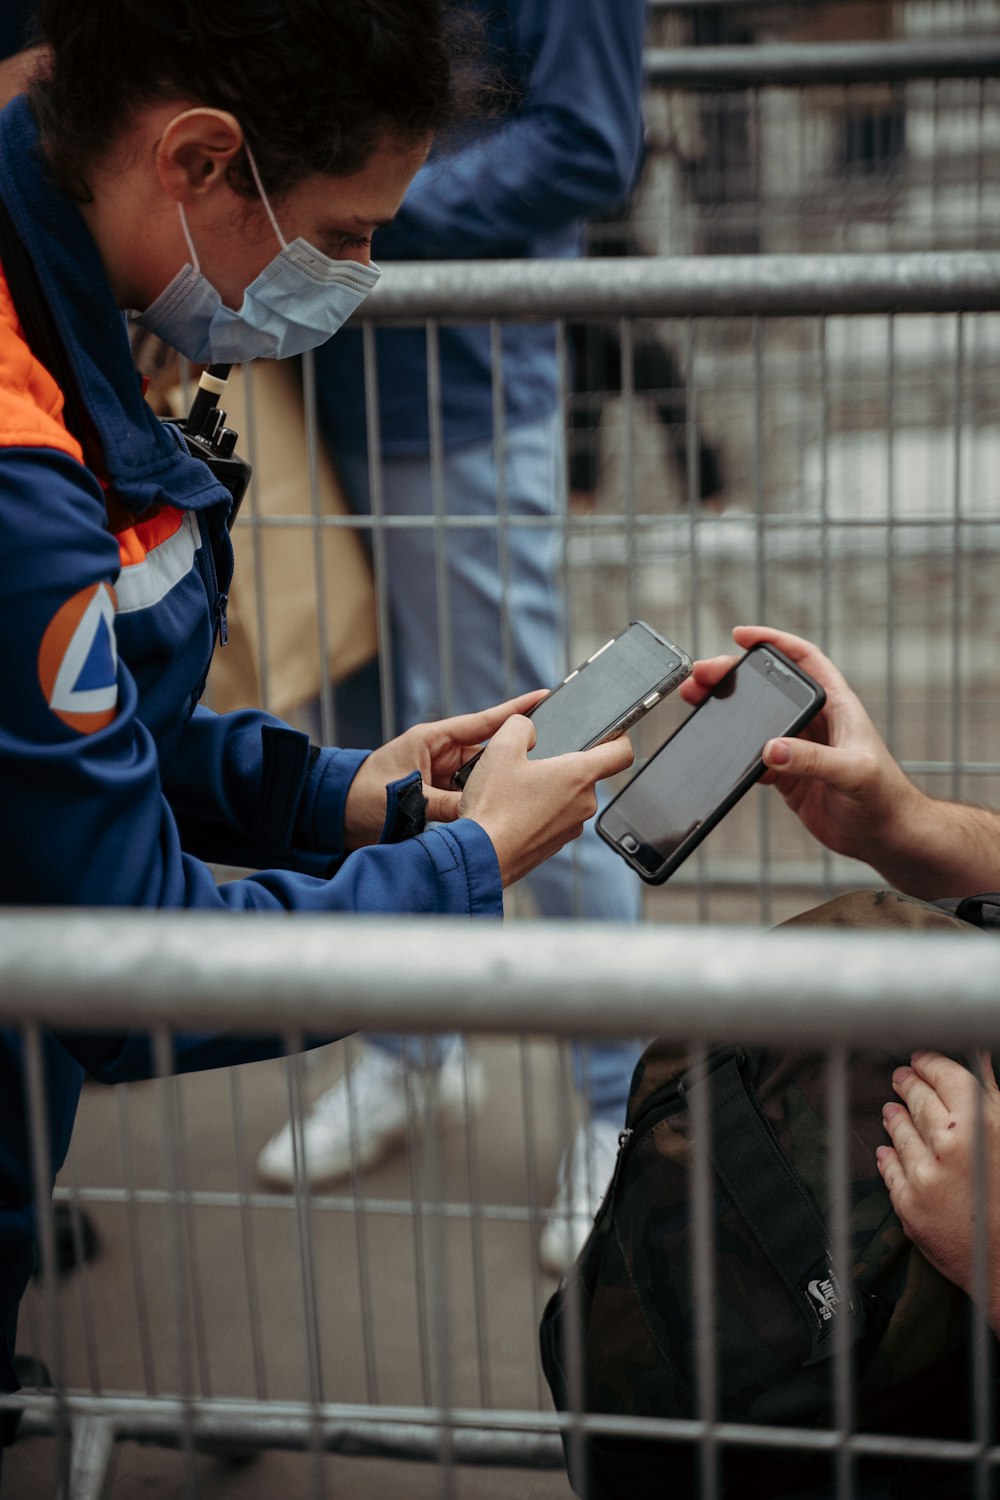 person in blue and orange jacket holding silver ipad